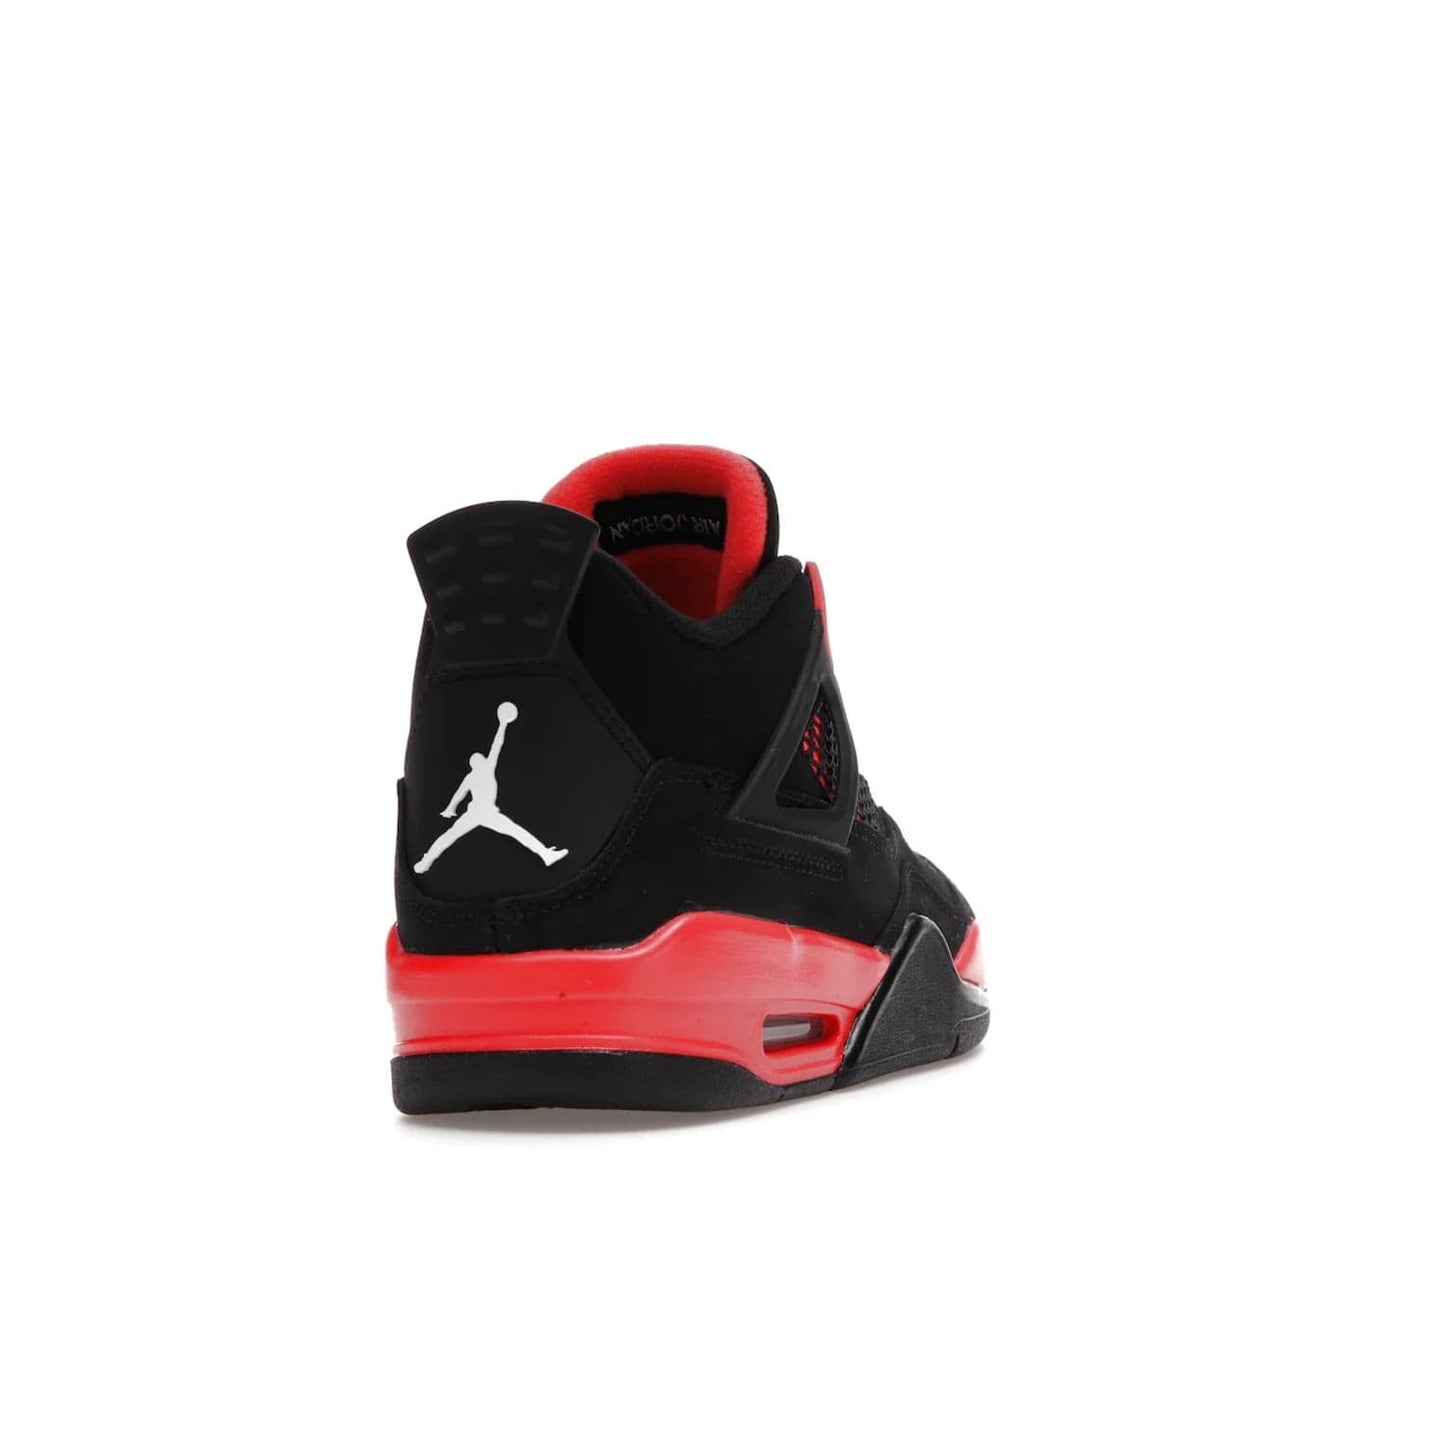 Jordan 4 Retro Red Thunder (GS) - Image 30 - Only at www.BallersClubKickz.com - The Air Jordan 4 Retro Red Thunder GS features a stylish black and crimson upper with a Jumpman logo. Athletic midsole with Air bubbles for cushioning and black rubber outsole with iconic motif complete this classic sneaker.